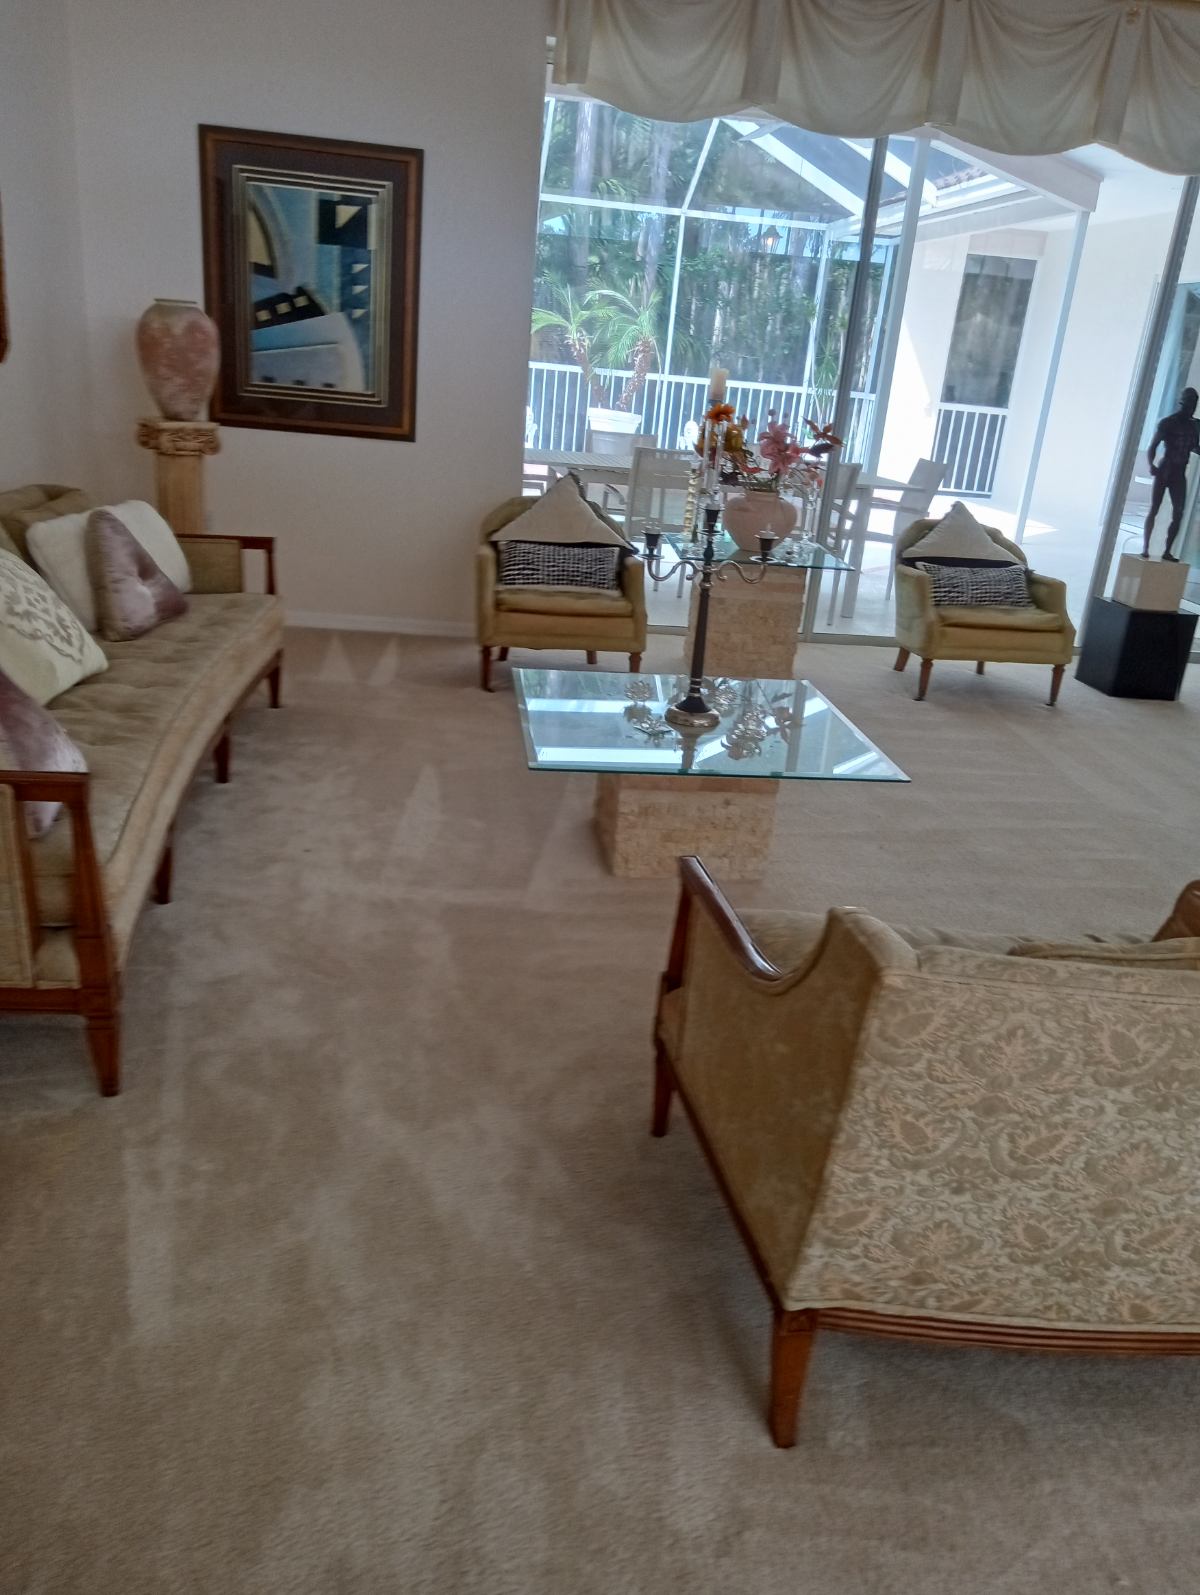 Tarpon Springs home cleaning experts providing top-notch cleaning services near you